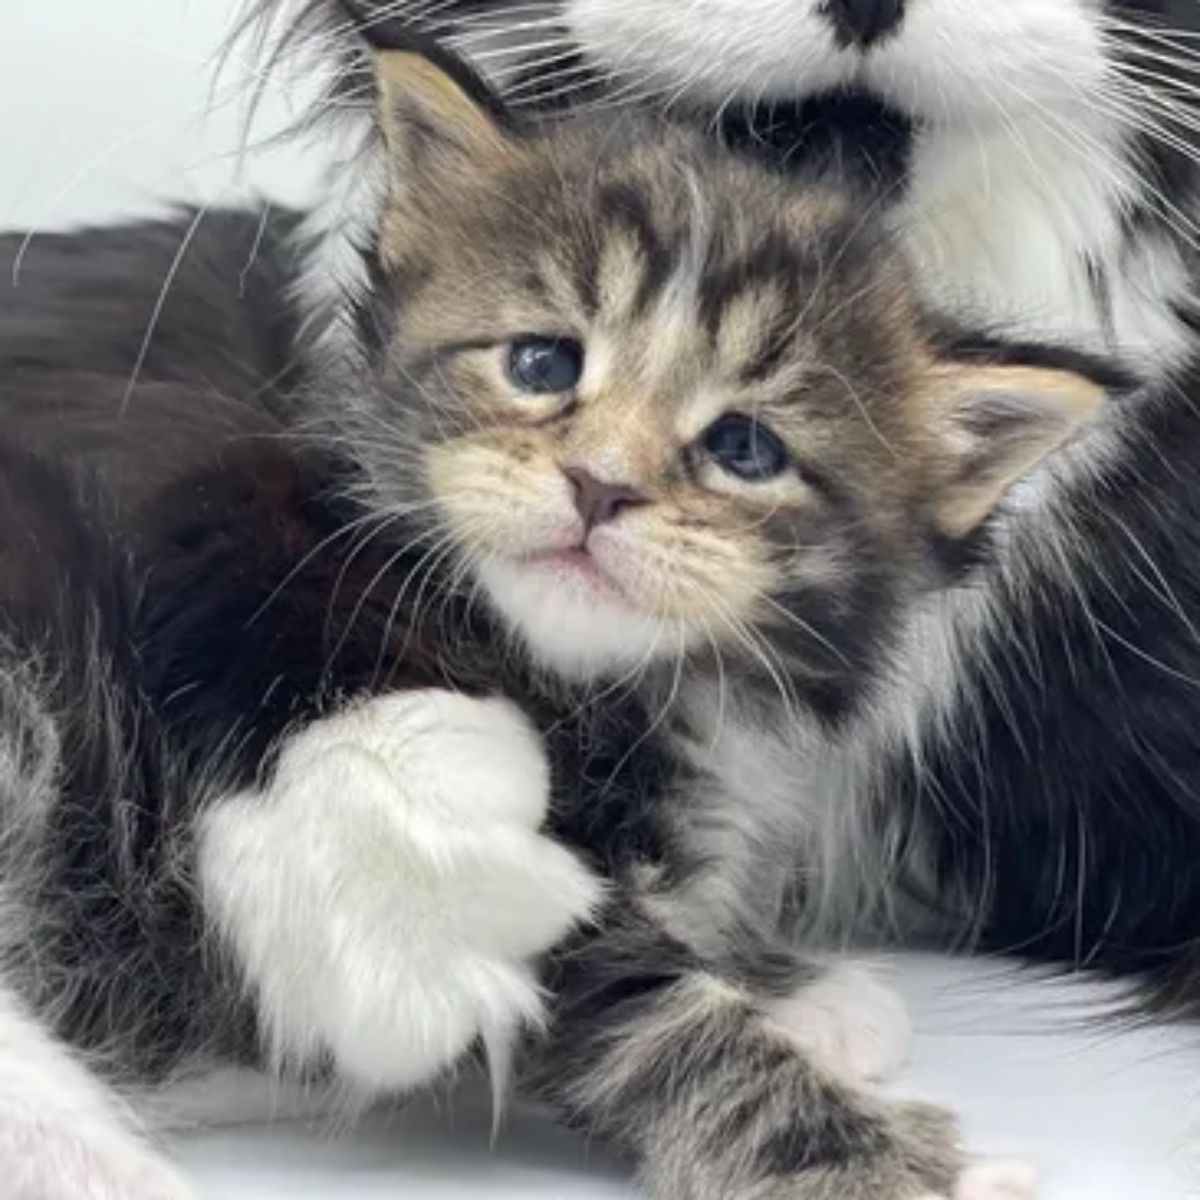 A cute fluffy maine coon kitten looking into a camera.